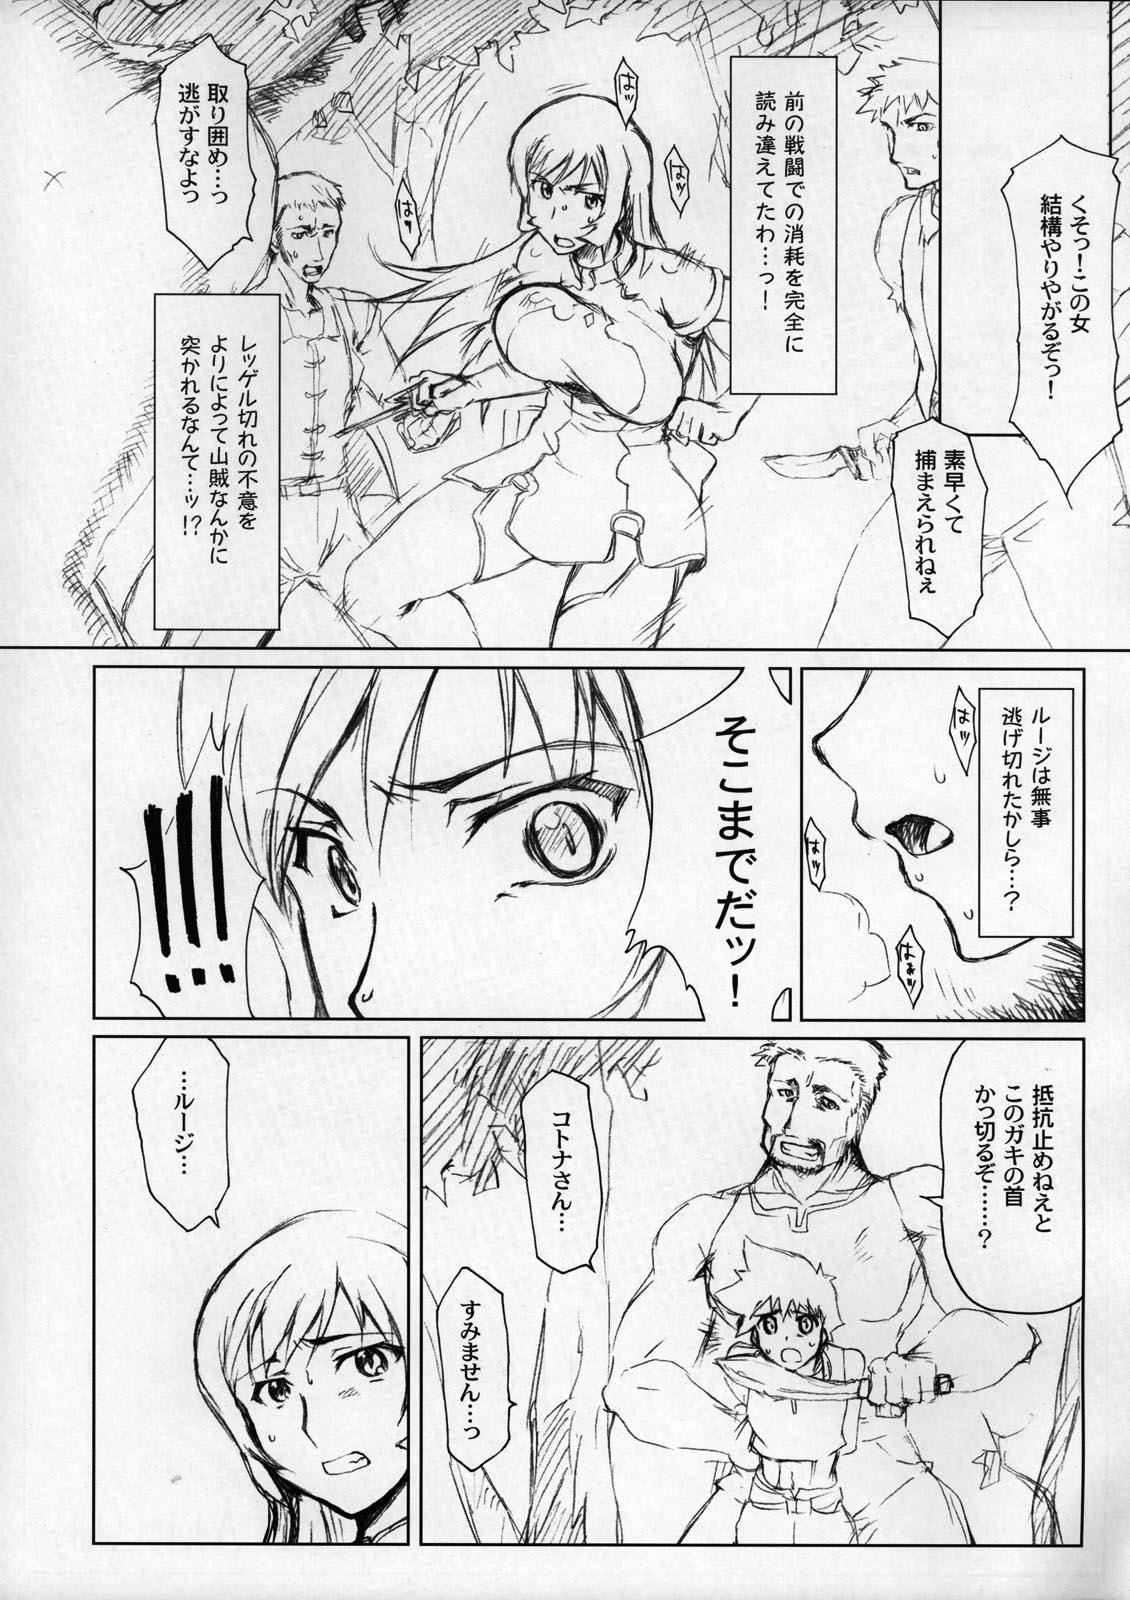 Doggy Style (C68) [Sago-Jou (Seura Isago)] Koto-rin Zantei | Koto-rin Pilot (Zoids Genesis) - Zoids genesis Big Pussy - Page 3